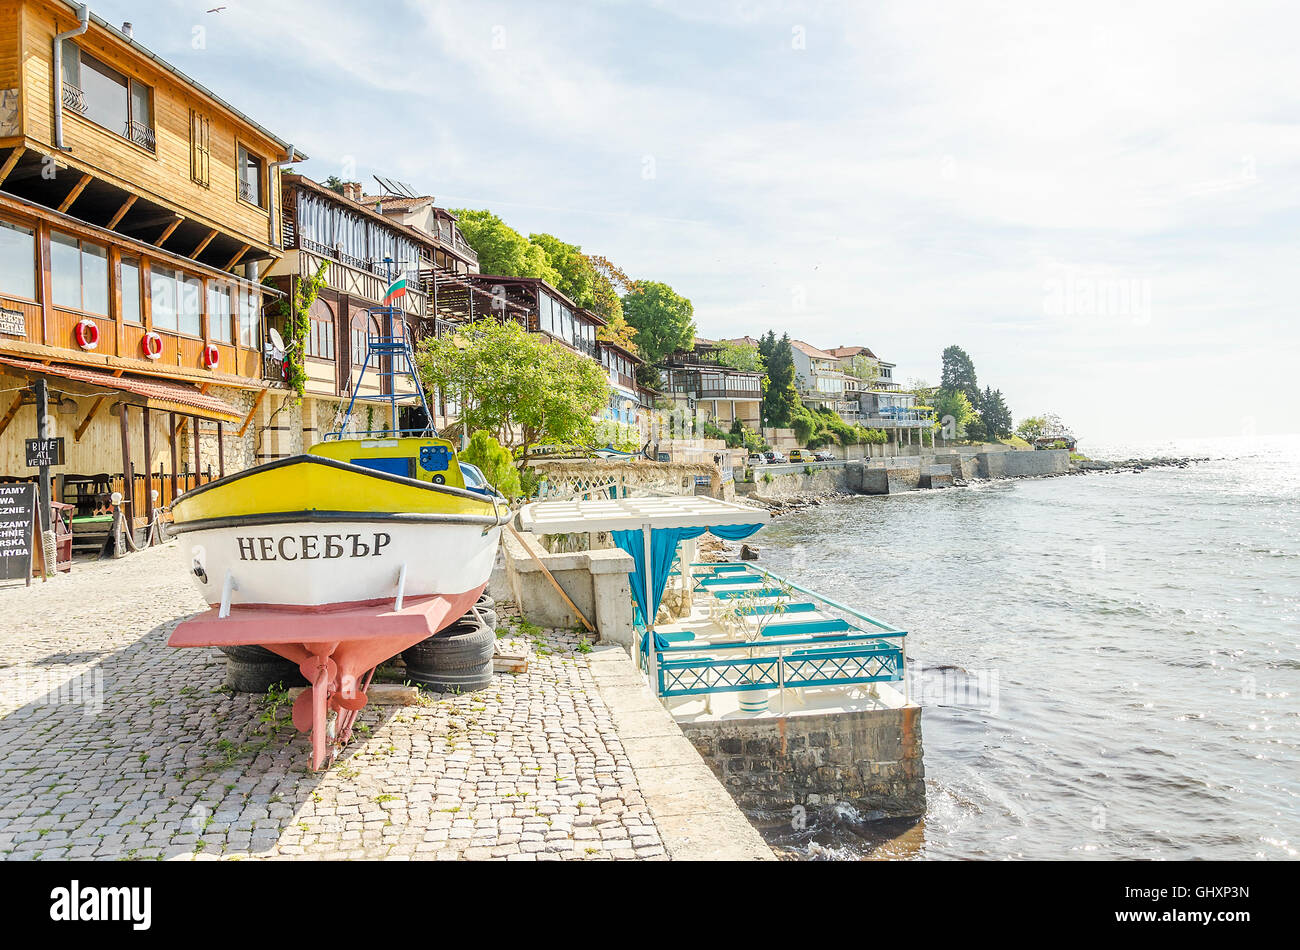 NESSEBAR, SUNNY BEACH, BULGARIA - MAY 2: Cozy street on the banks of the old tourist town, on May 2, 2016 in Nessebar, Sunny Bea Stock Photo